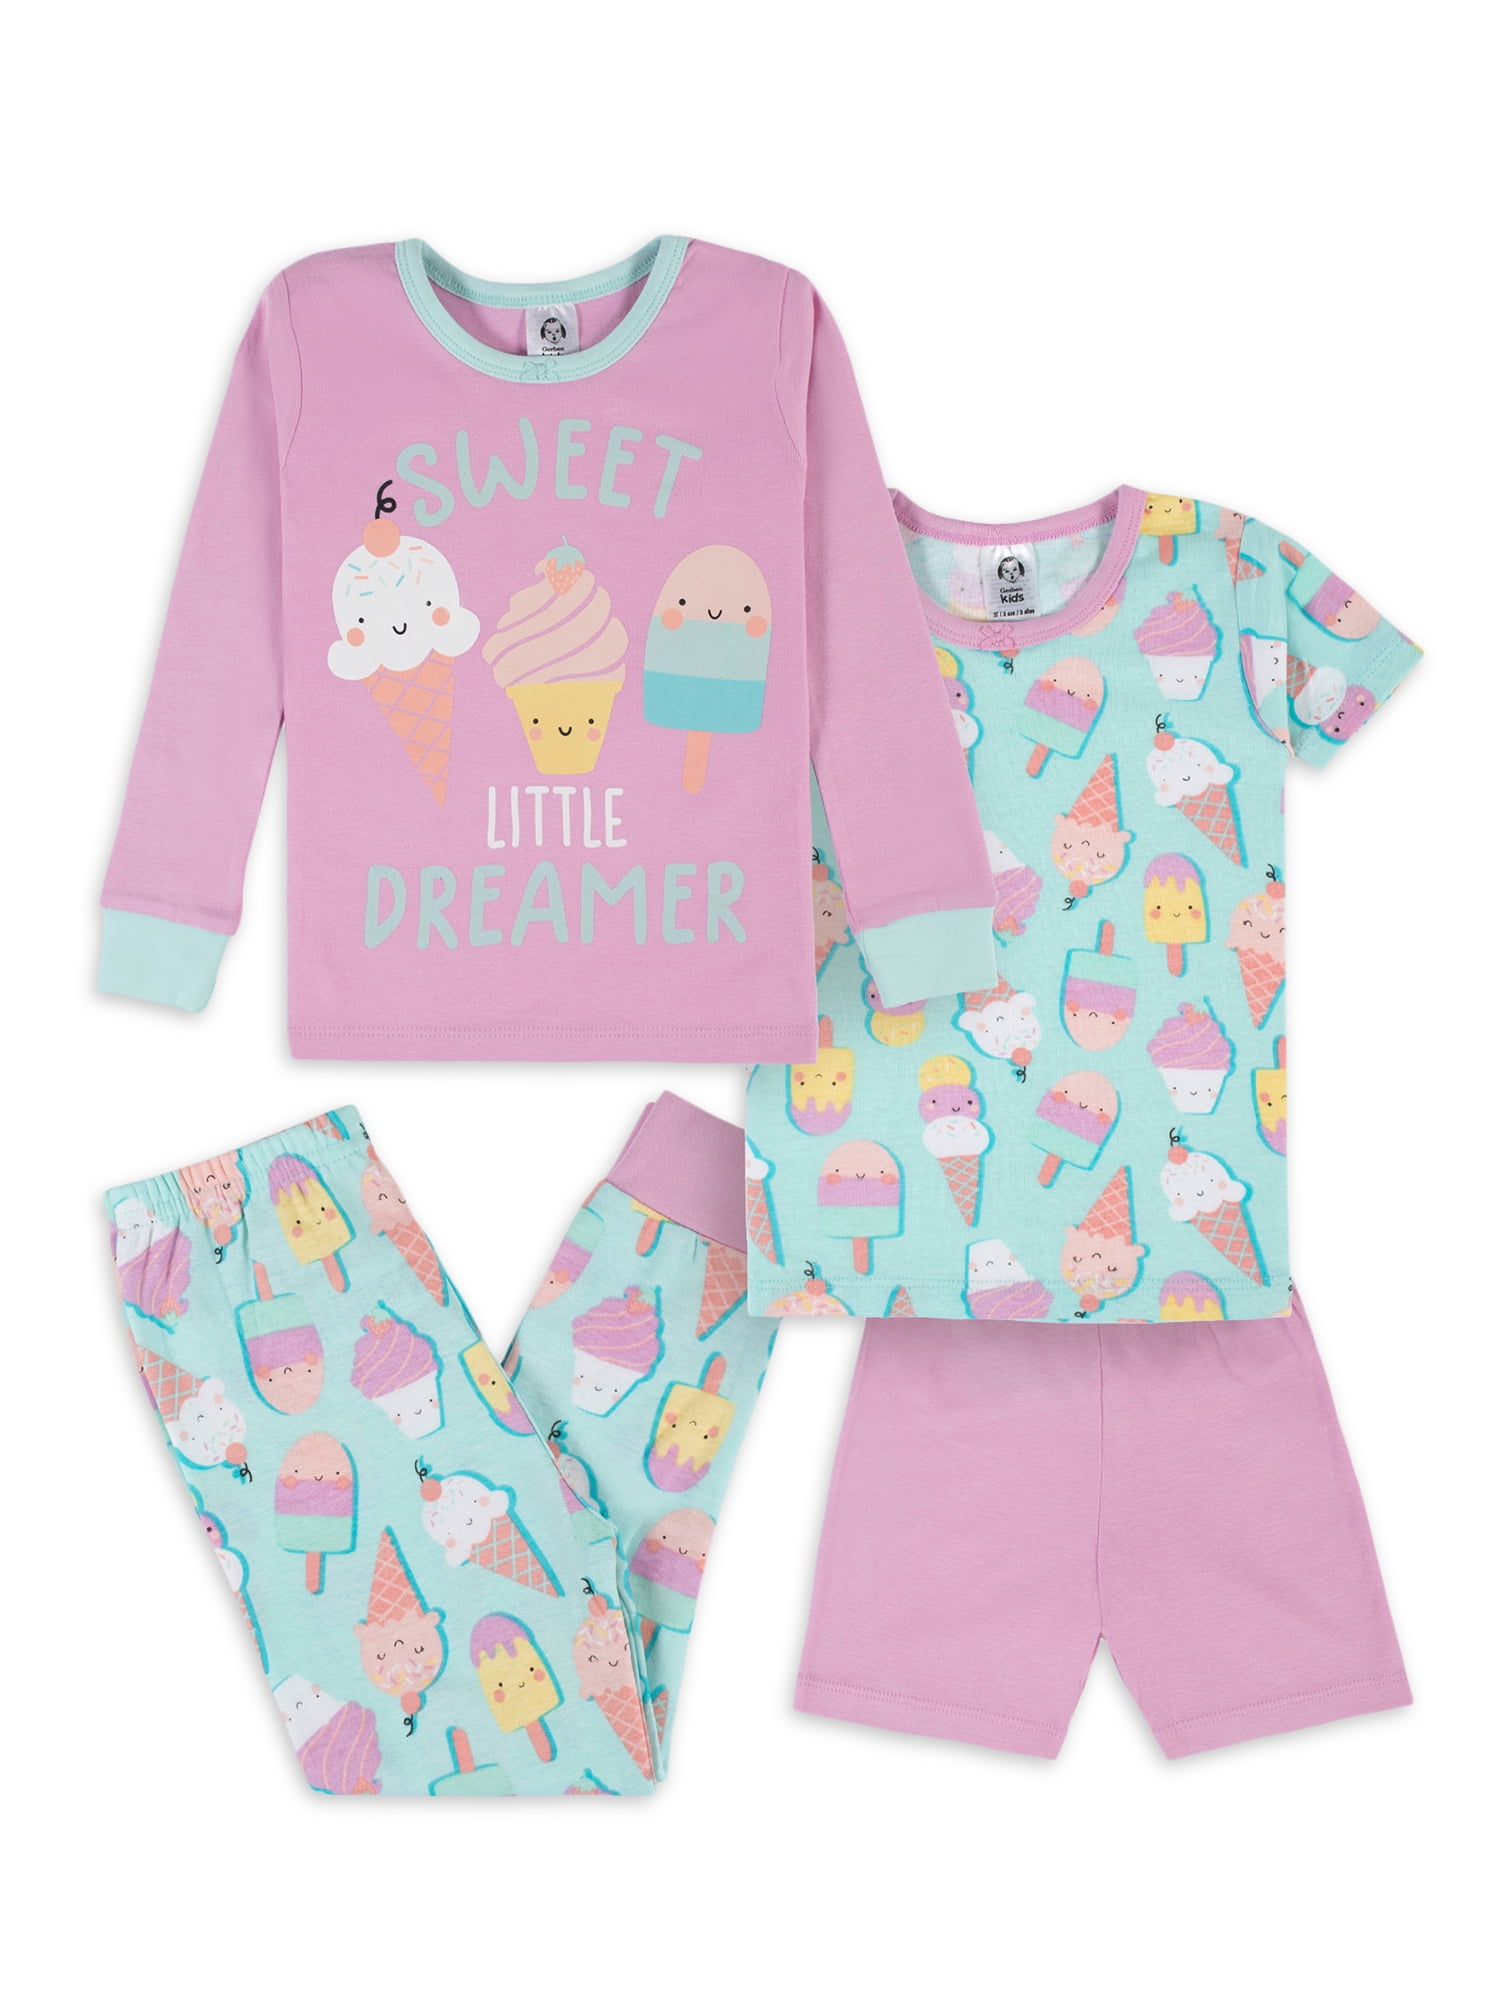 Details about   Carter's Girls 4T 2 piece Pajamas Long Sleeve Winking Heart on Top